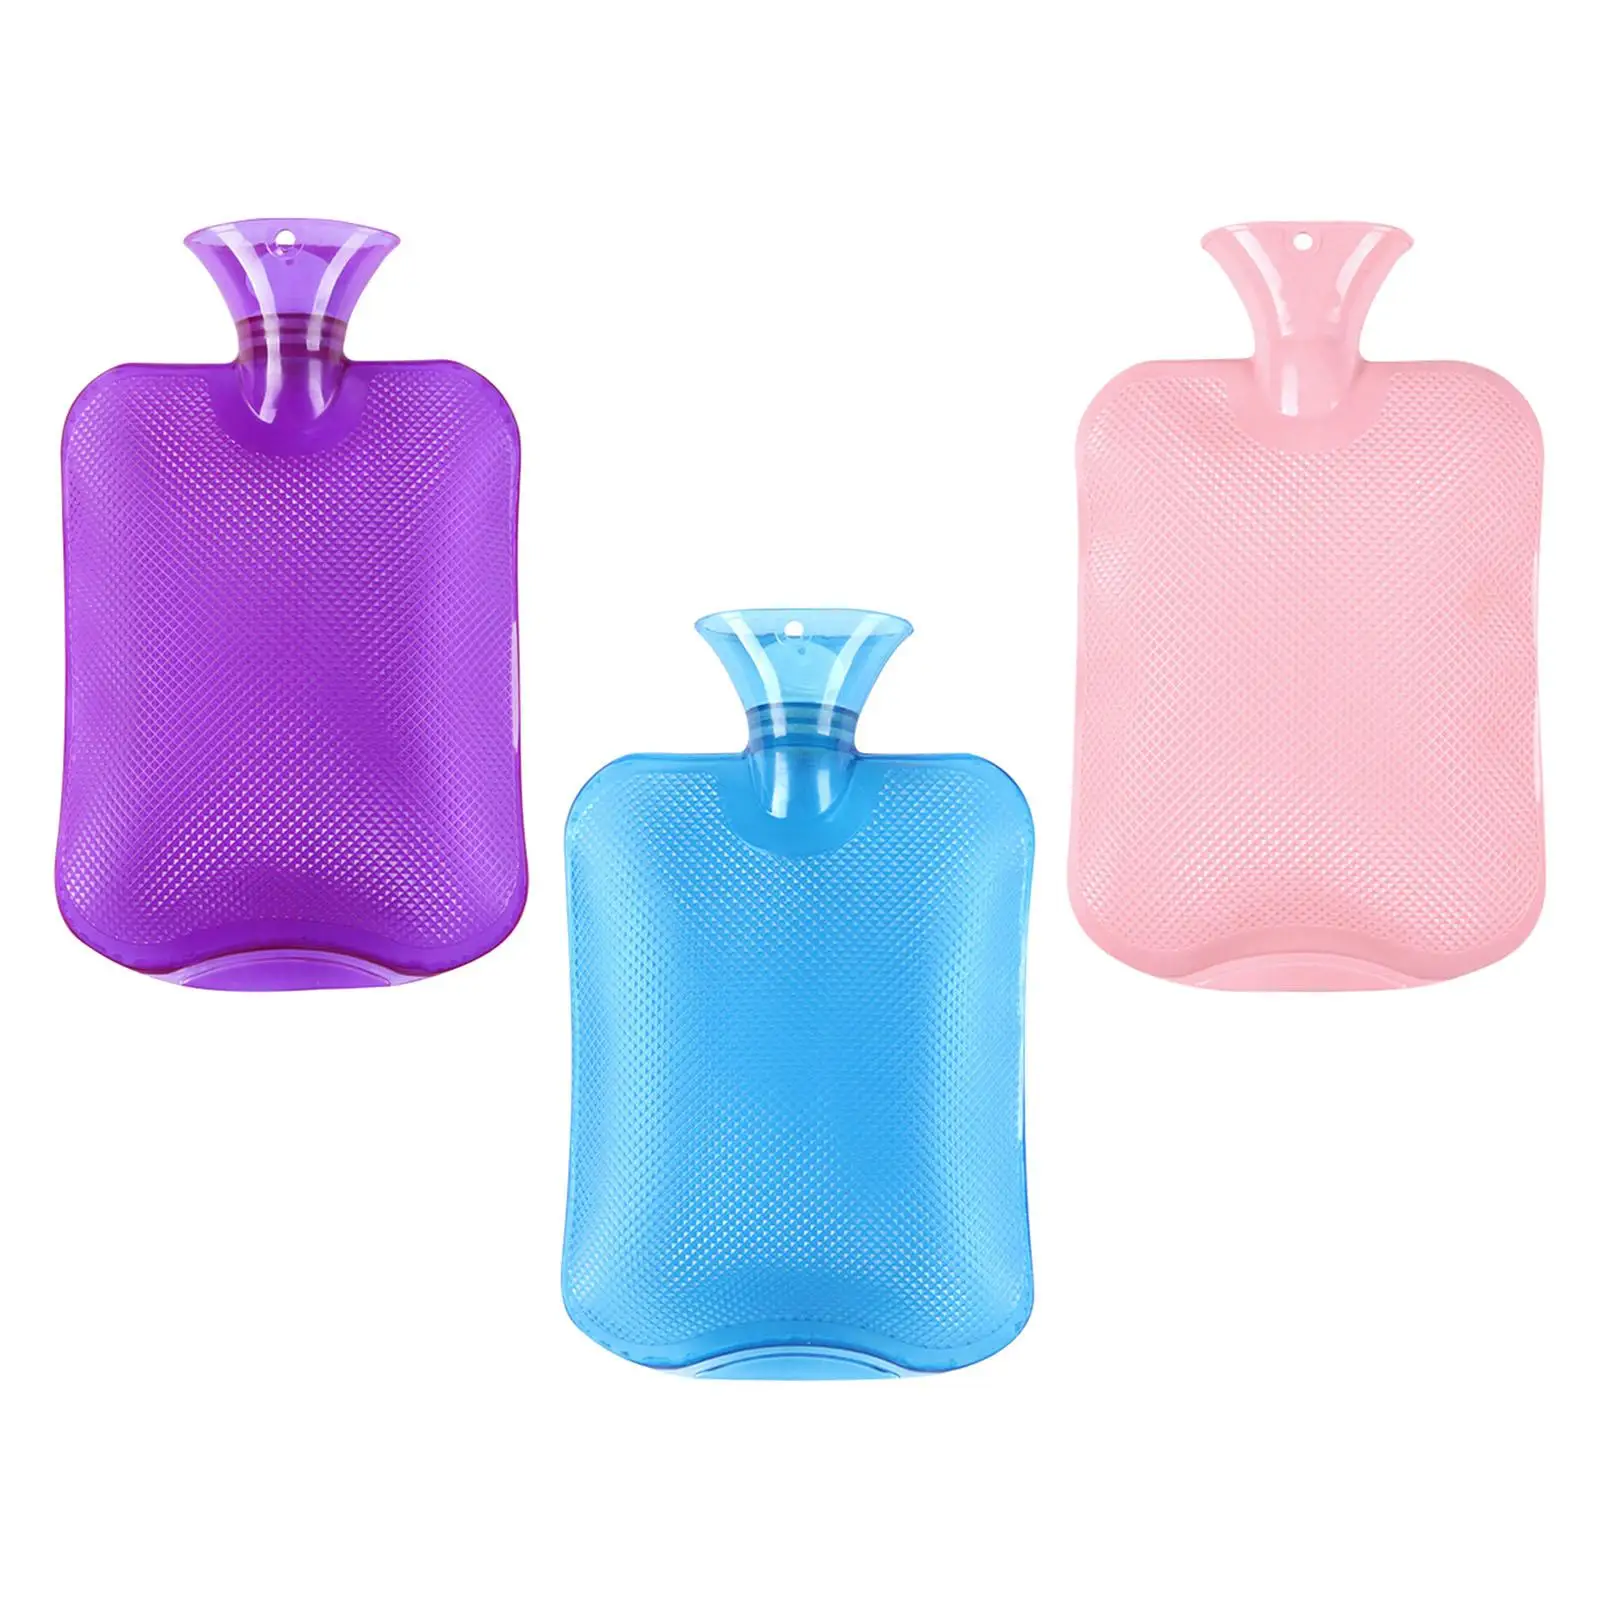 Premium PVC Hot Water Bottle, Large 2 Liter Hand Warmer, Hot Water Bag, Durable Water Filling Bag, 2mm Thick